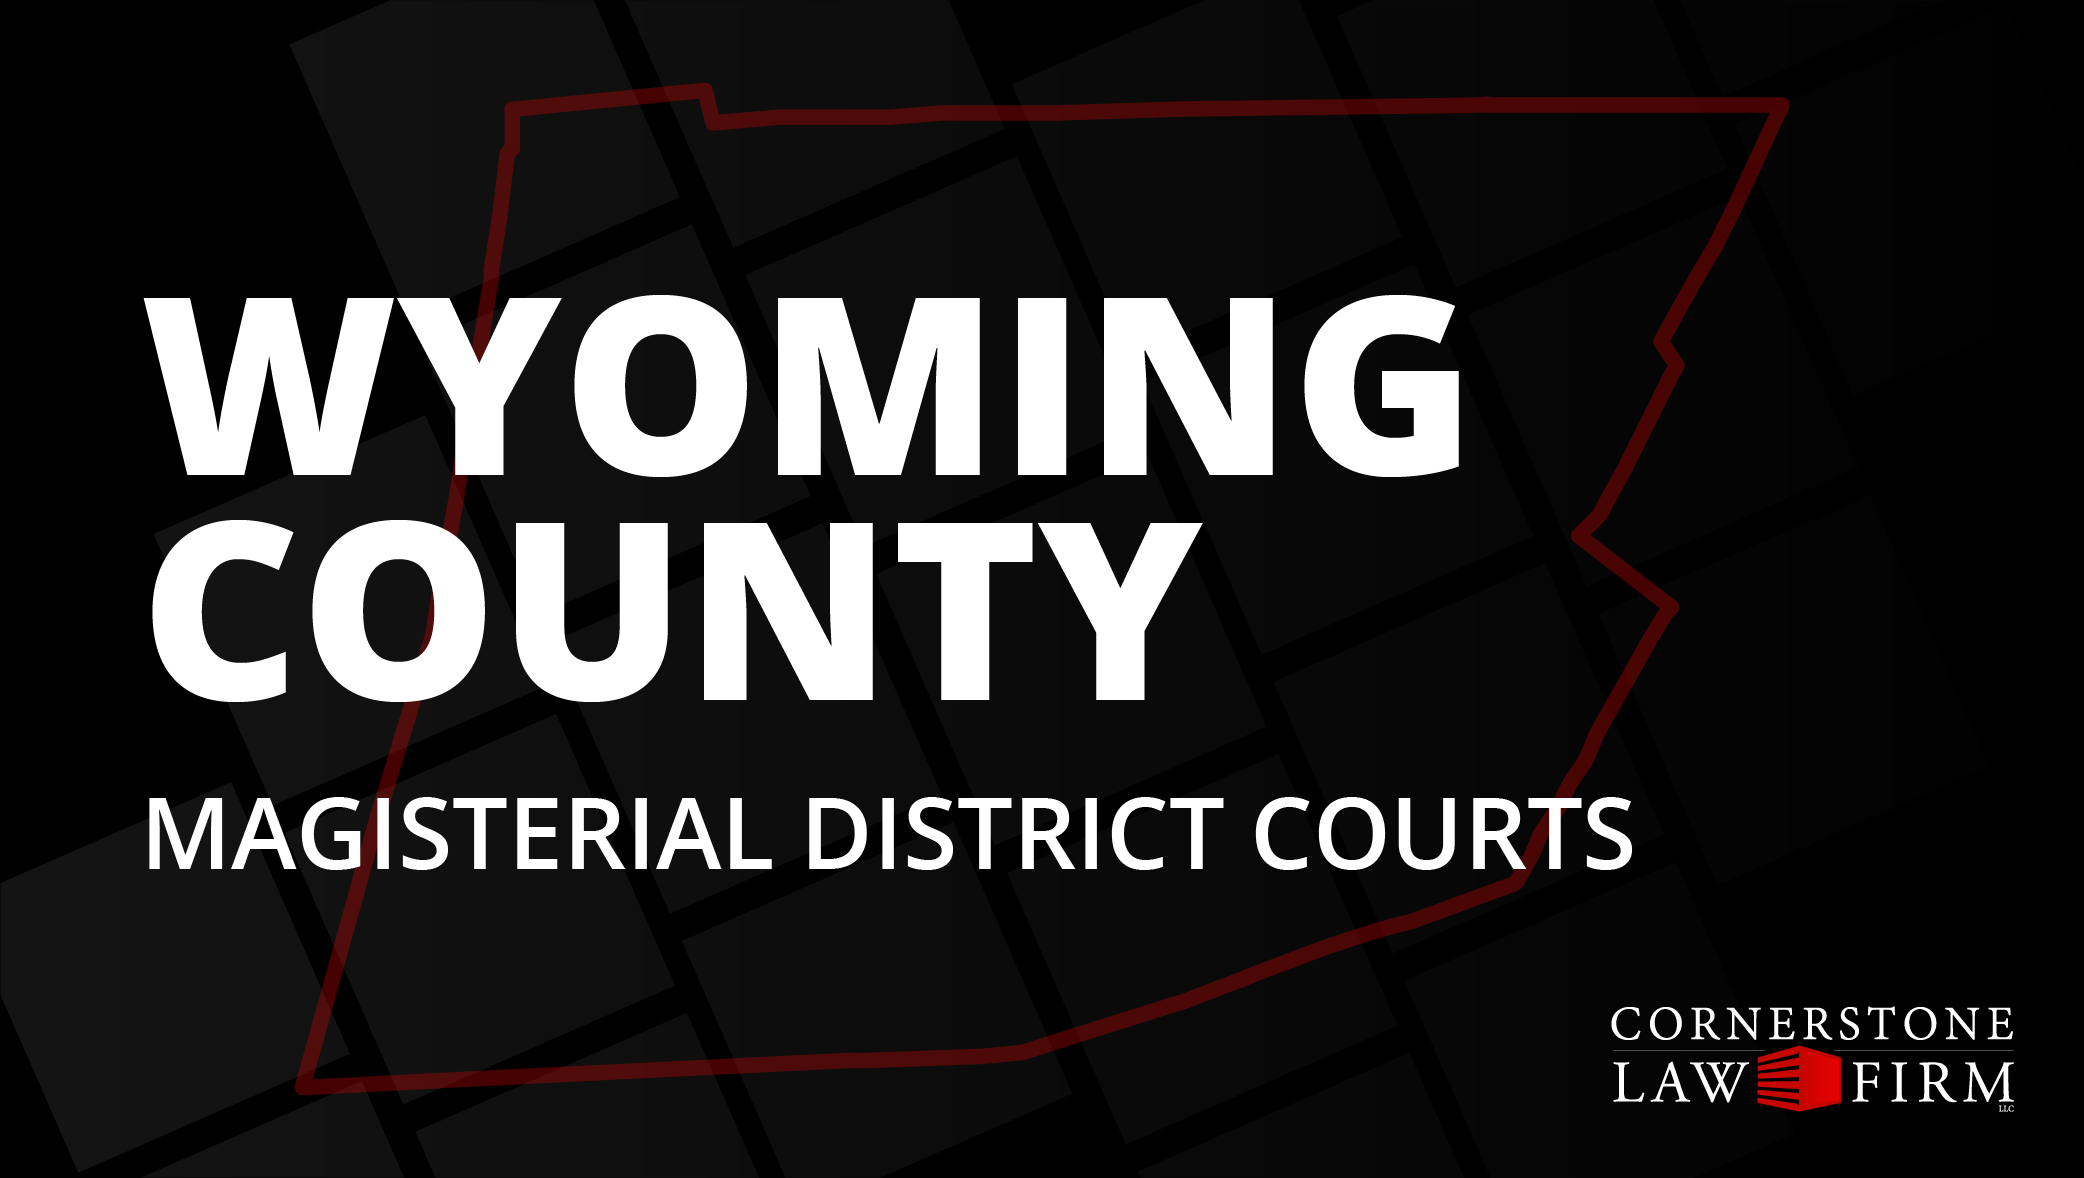 The words "Wyoming County Magisterial District Courts" over a black background with a faded red outline of the county.